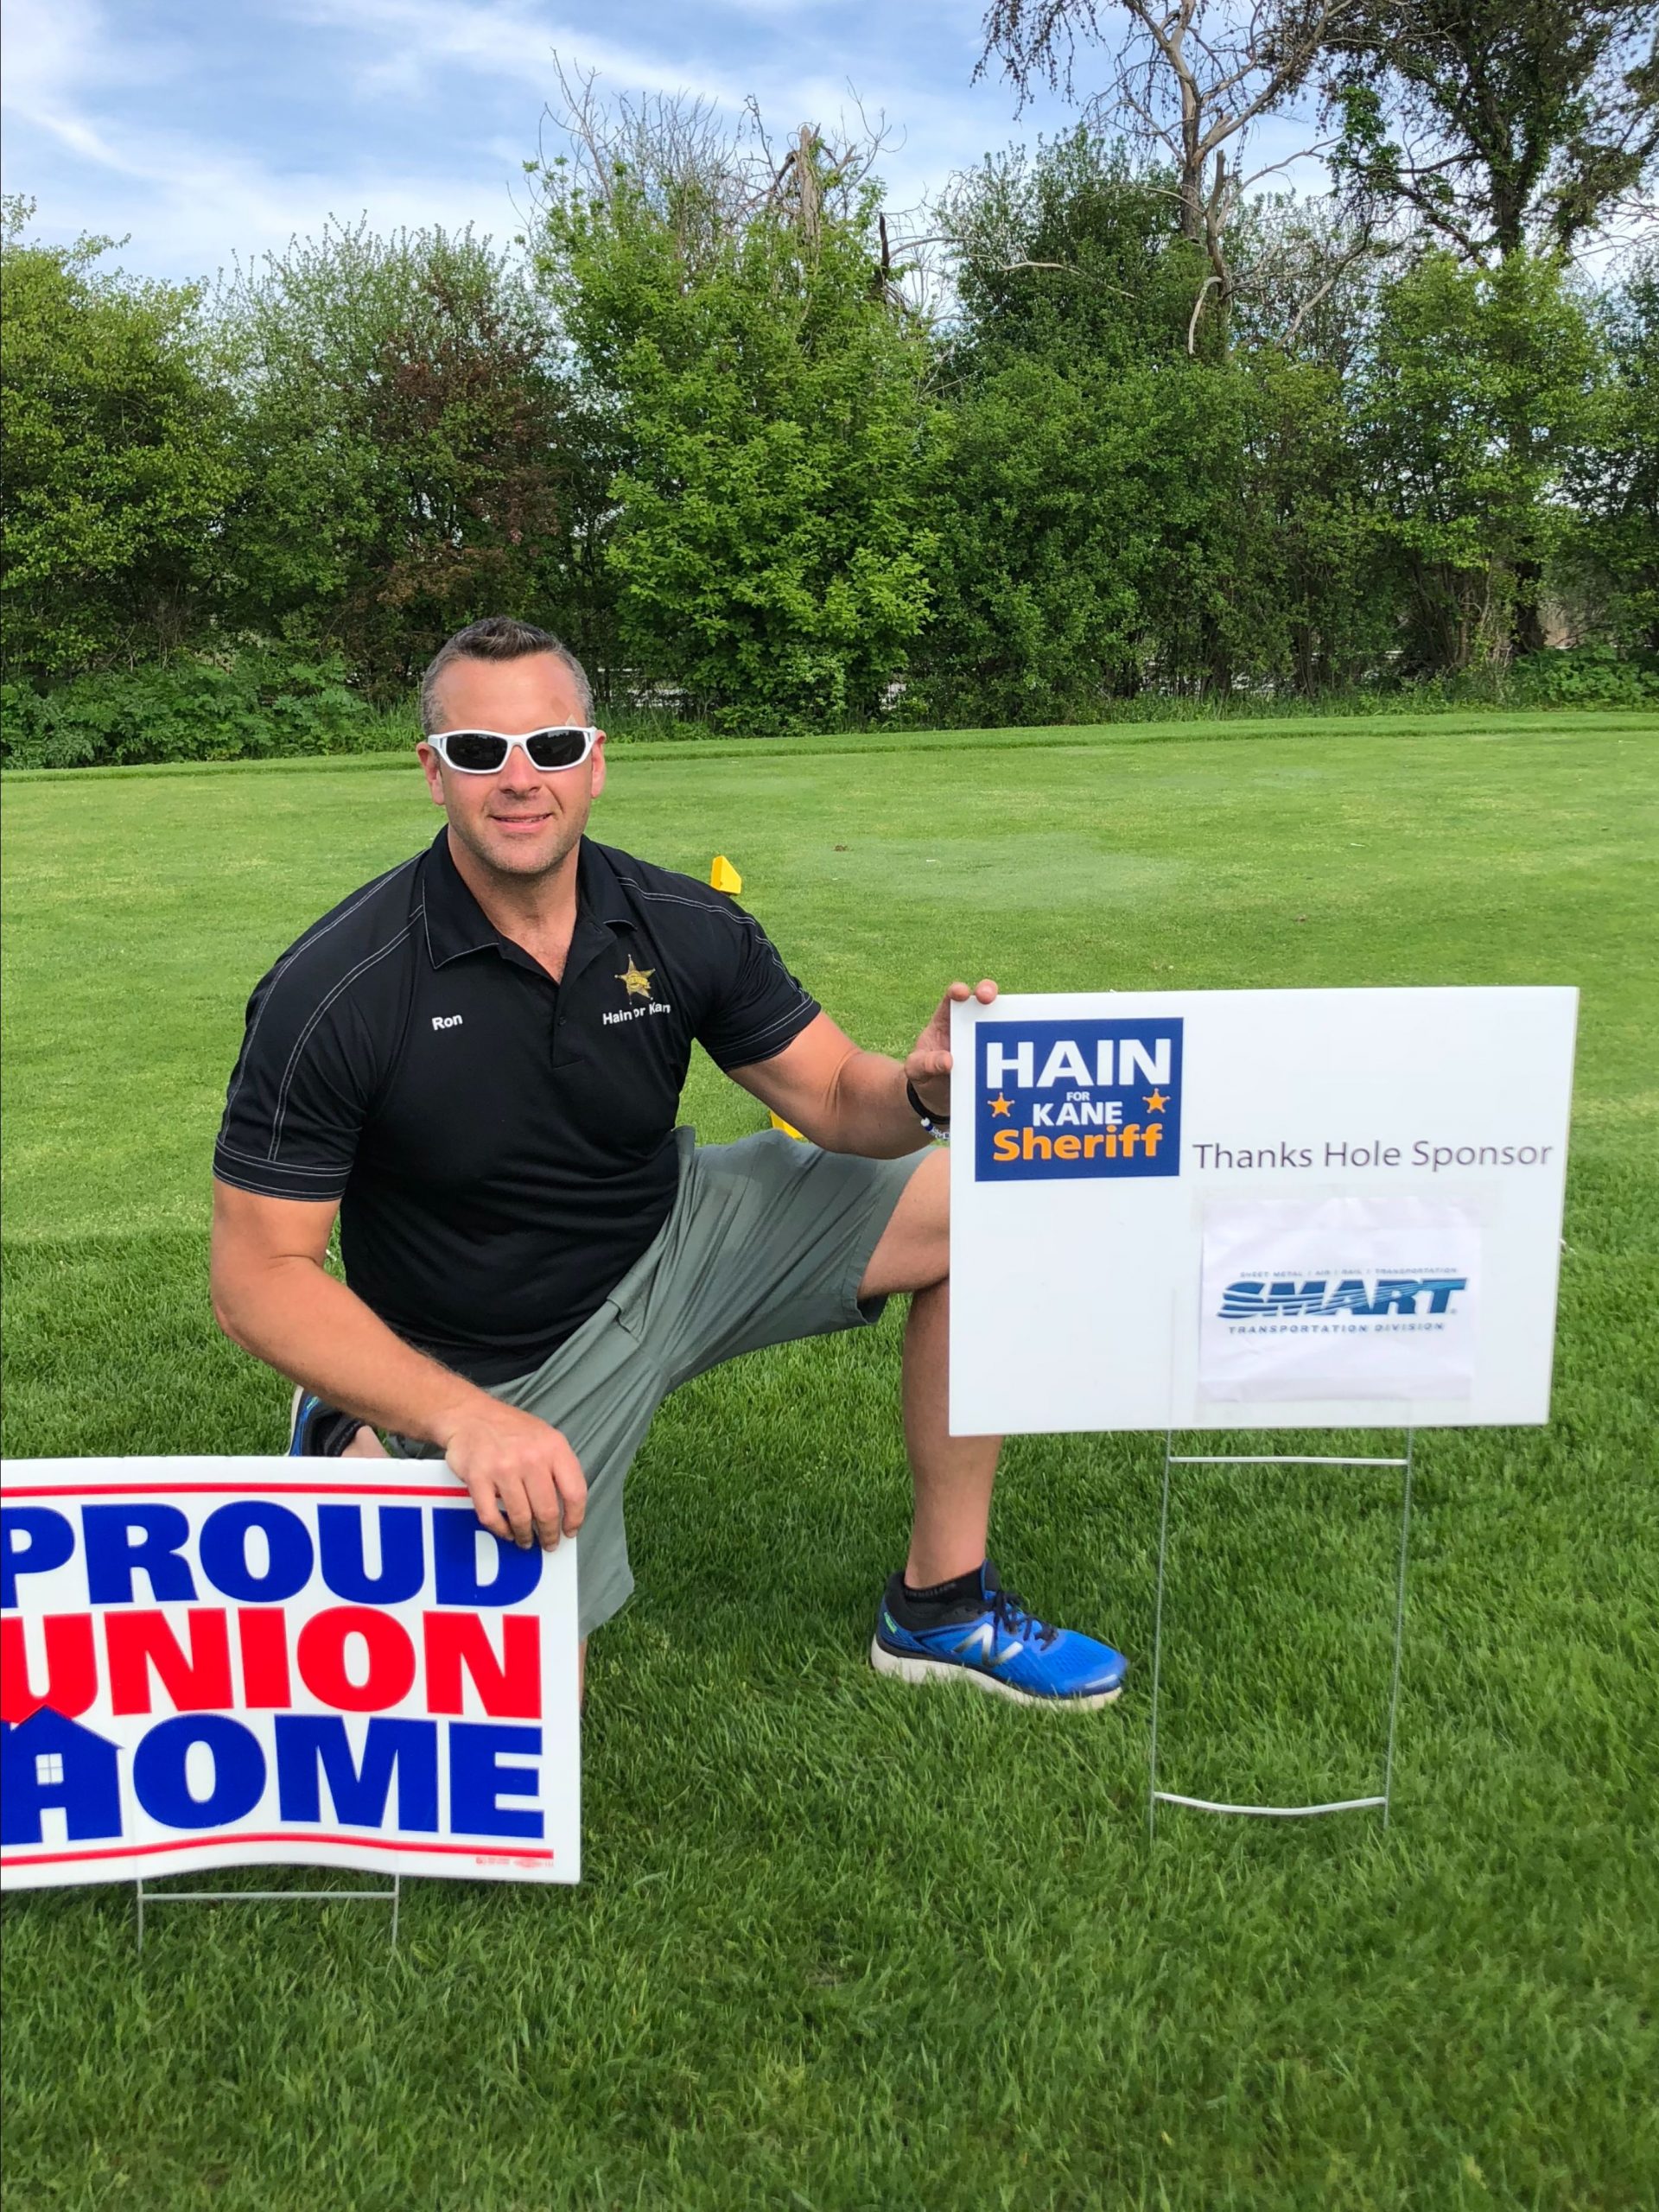 Hain for Kane Golf Outing @ Bliss Creek Golf Course